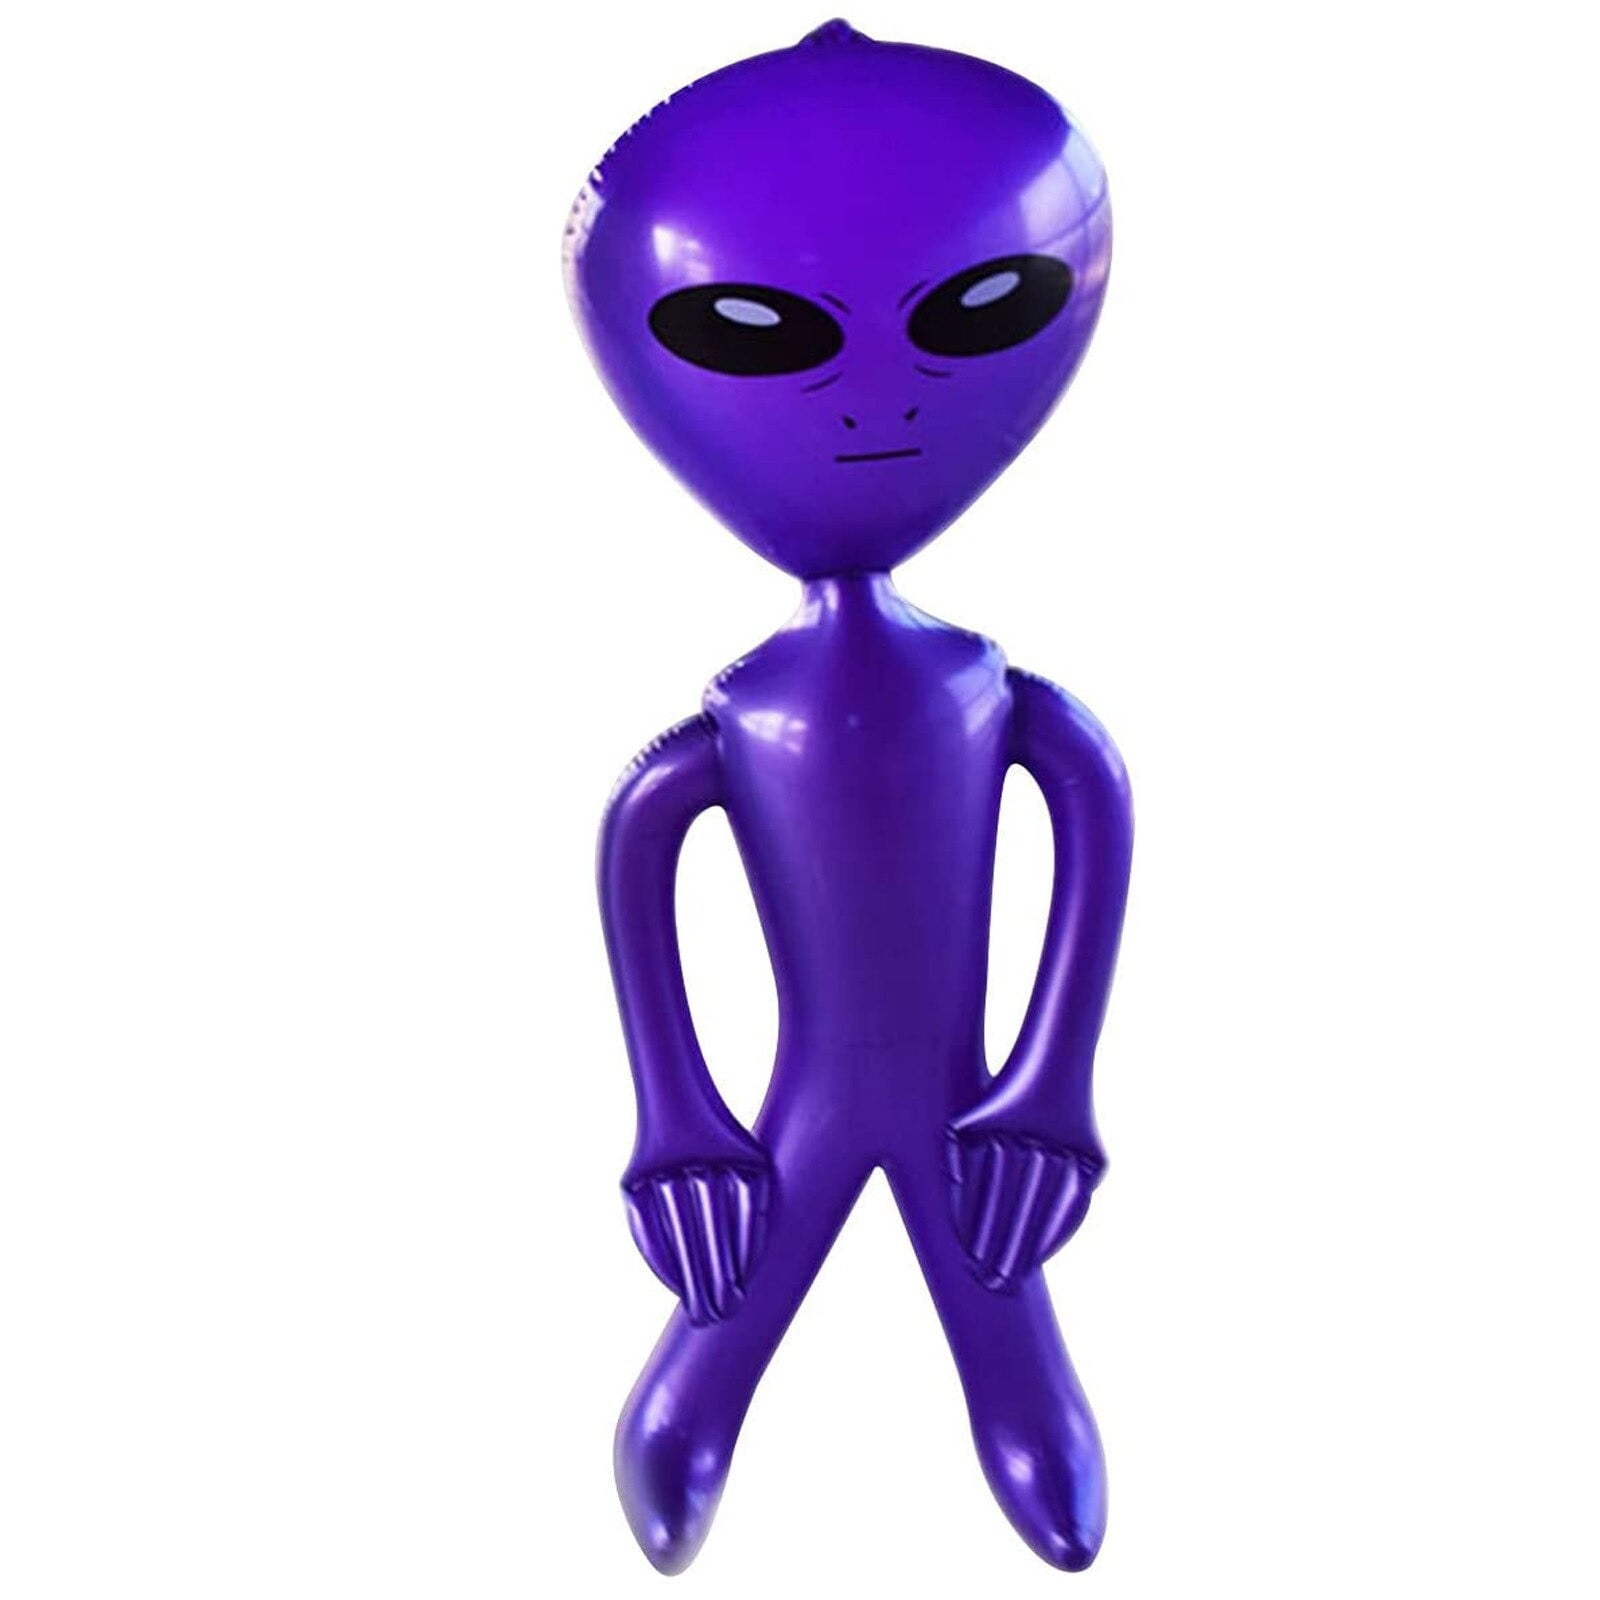 GIANT 96"-100" INCH ALIEN INFLATE INFLATABLE 8 FEET BLOW UP PROP GAG HALLOWEEN